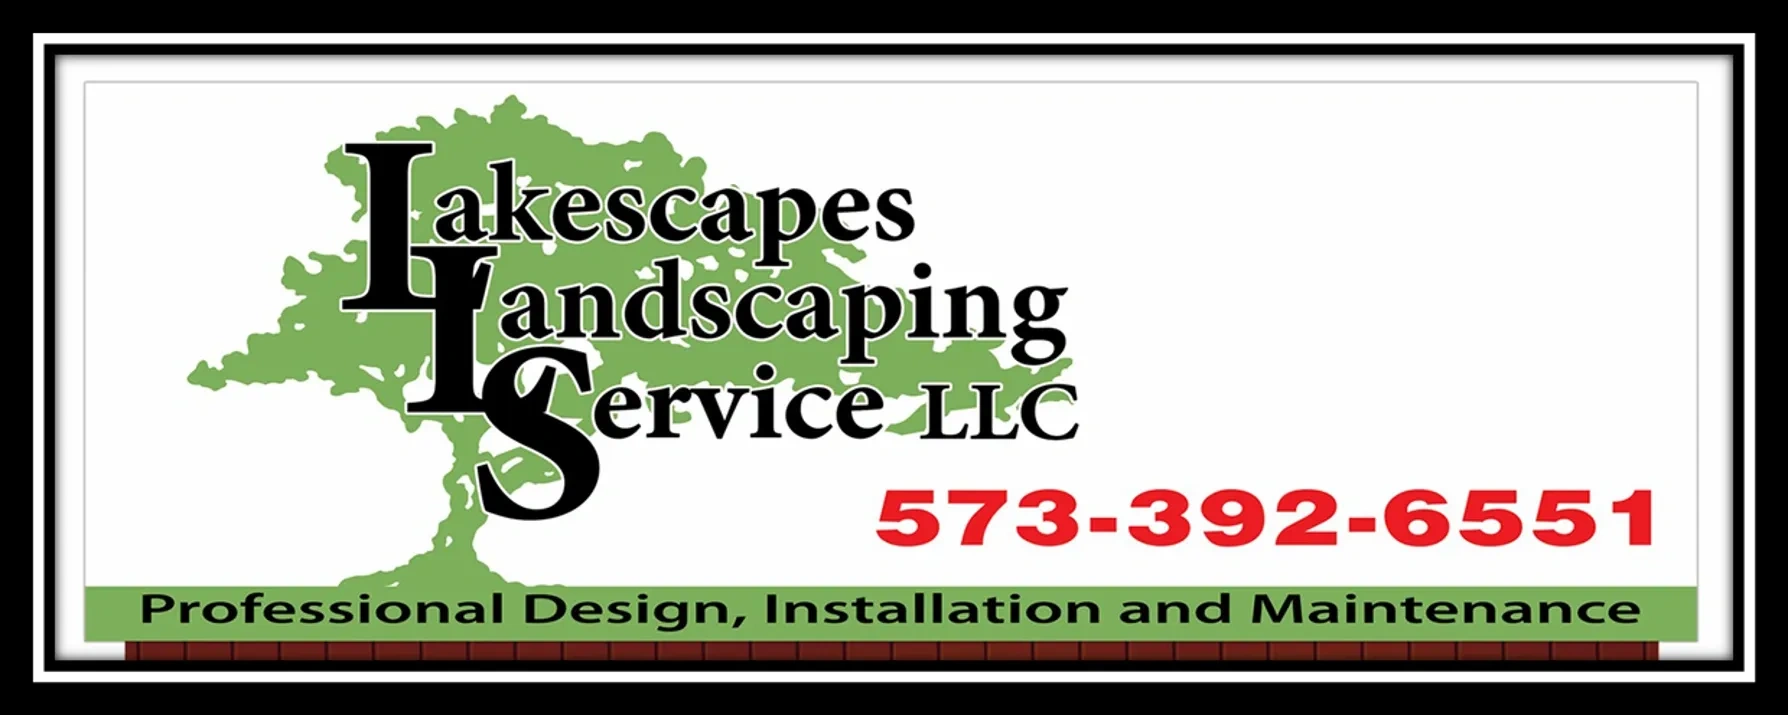 your landscaping company at the lake for over 28 years